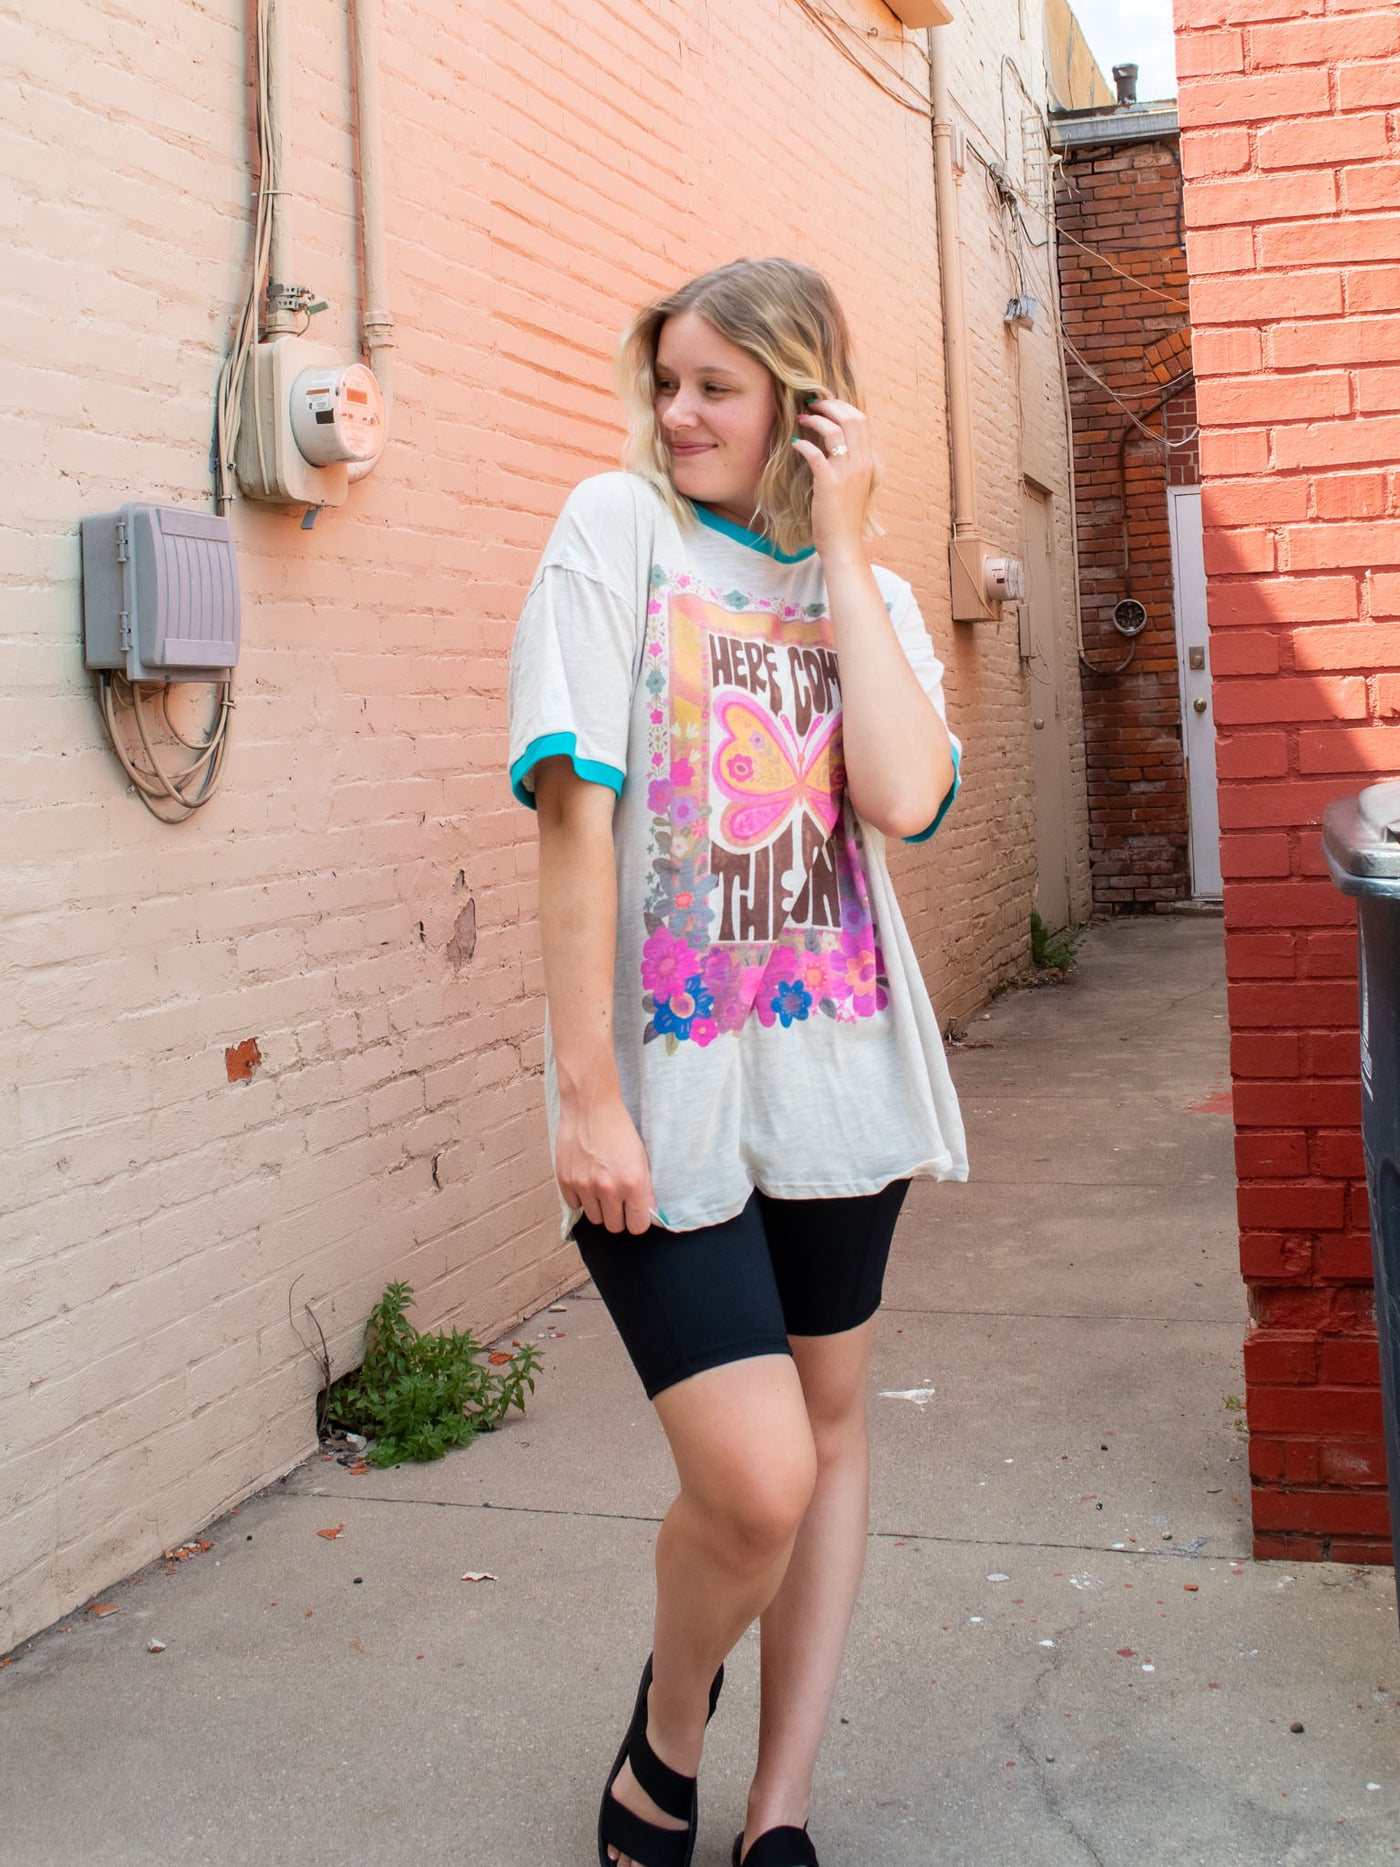 A model wearing an oversized gray graphic tee with contrasting teal blue bands on the sleeves and neckline, and the saying "here comes the sun" surrounded by flowers and butterflies. The model has it paired with black biker shorts and black sandals.